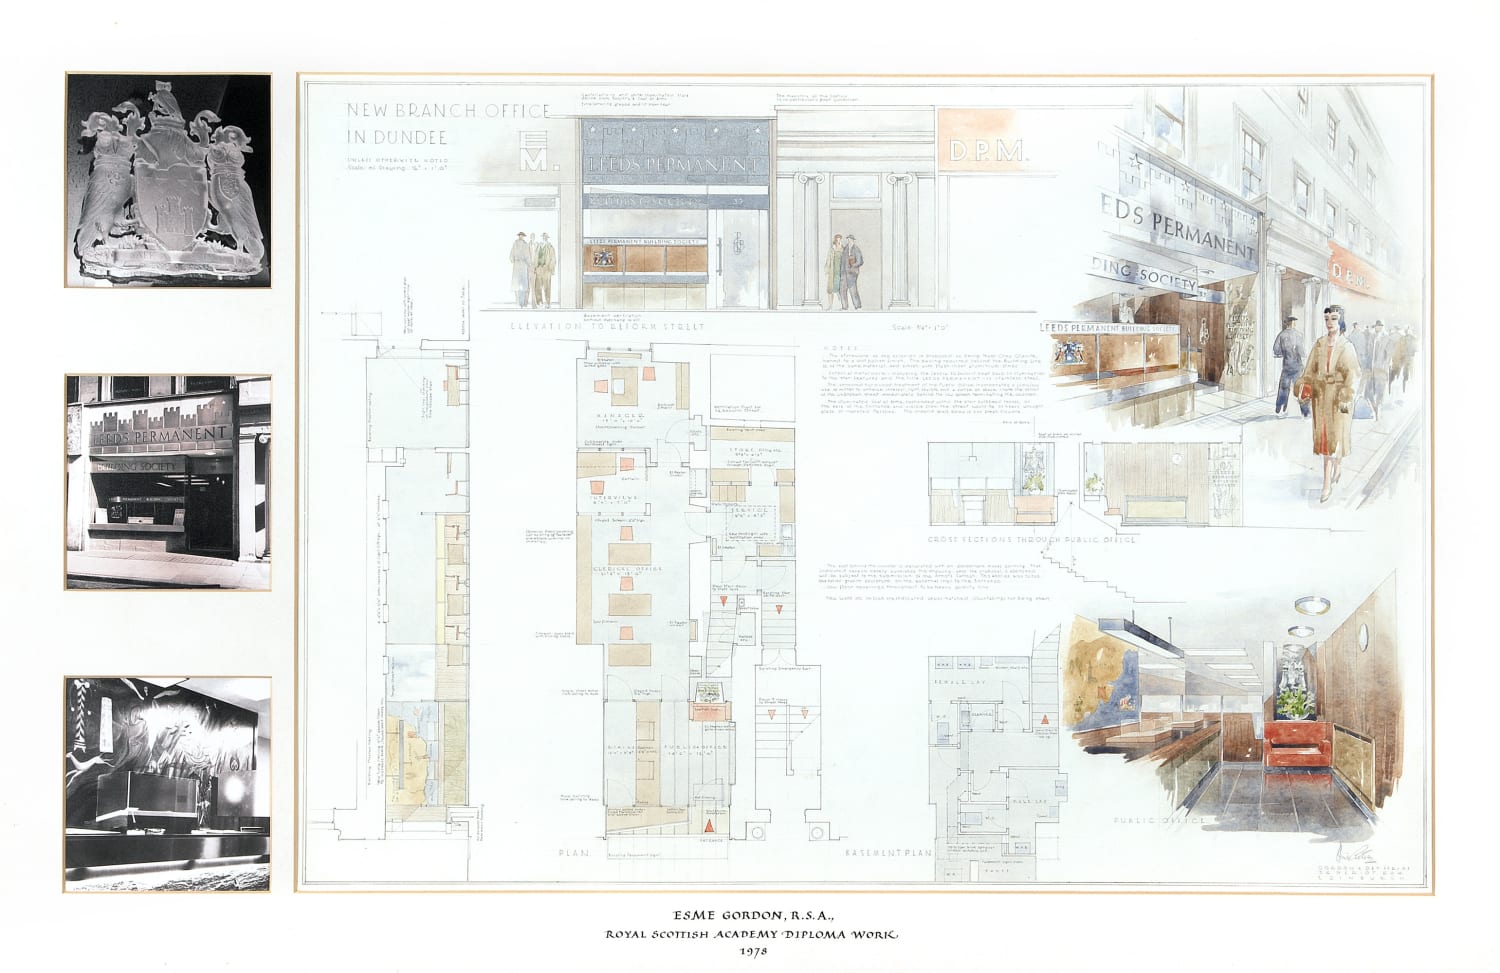 Alexander Esme Gordon RSA (1910-93), Leeds Permanent Building Society, New Branch Office in Dundee  architectural drawing; pencil, watercolour, b&w photographs, around 1977-78, 60.7 x 101.8 cm  RSA Diploma Collection Deposit, 1977. 1994.170